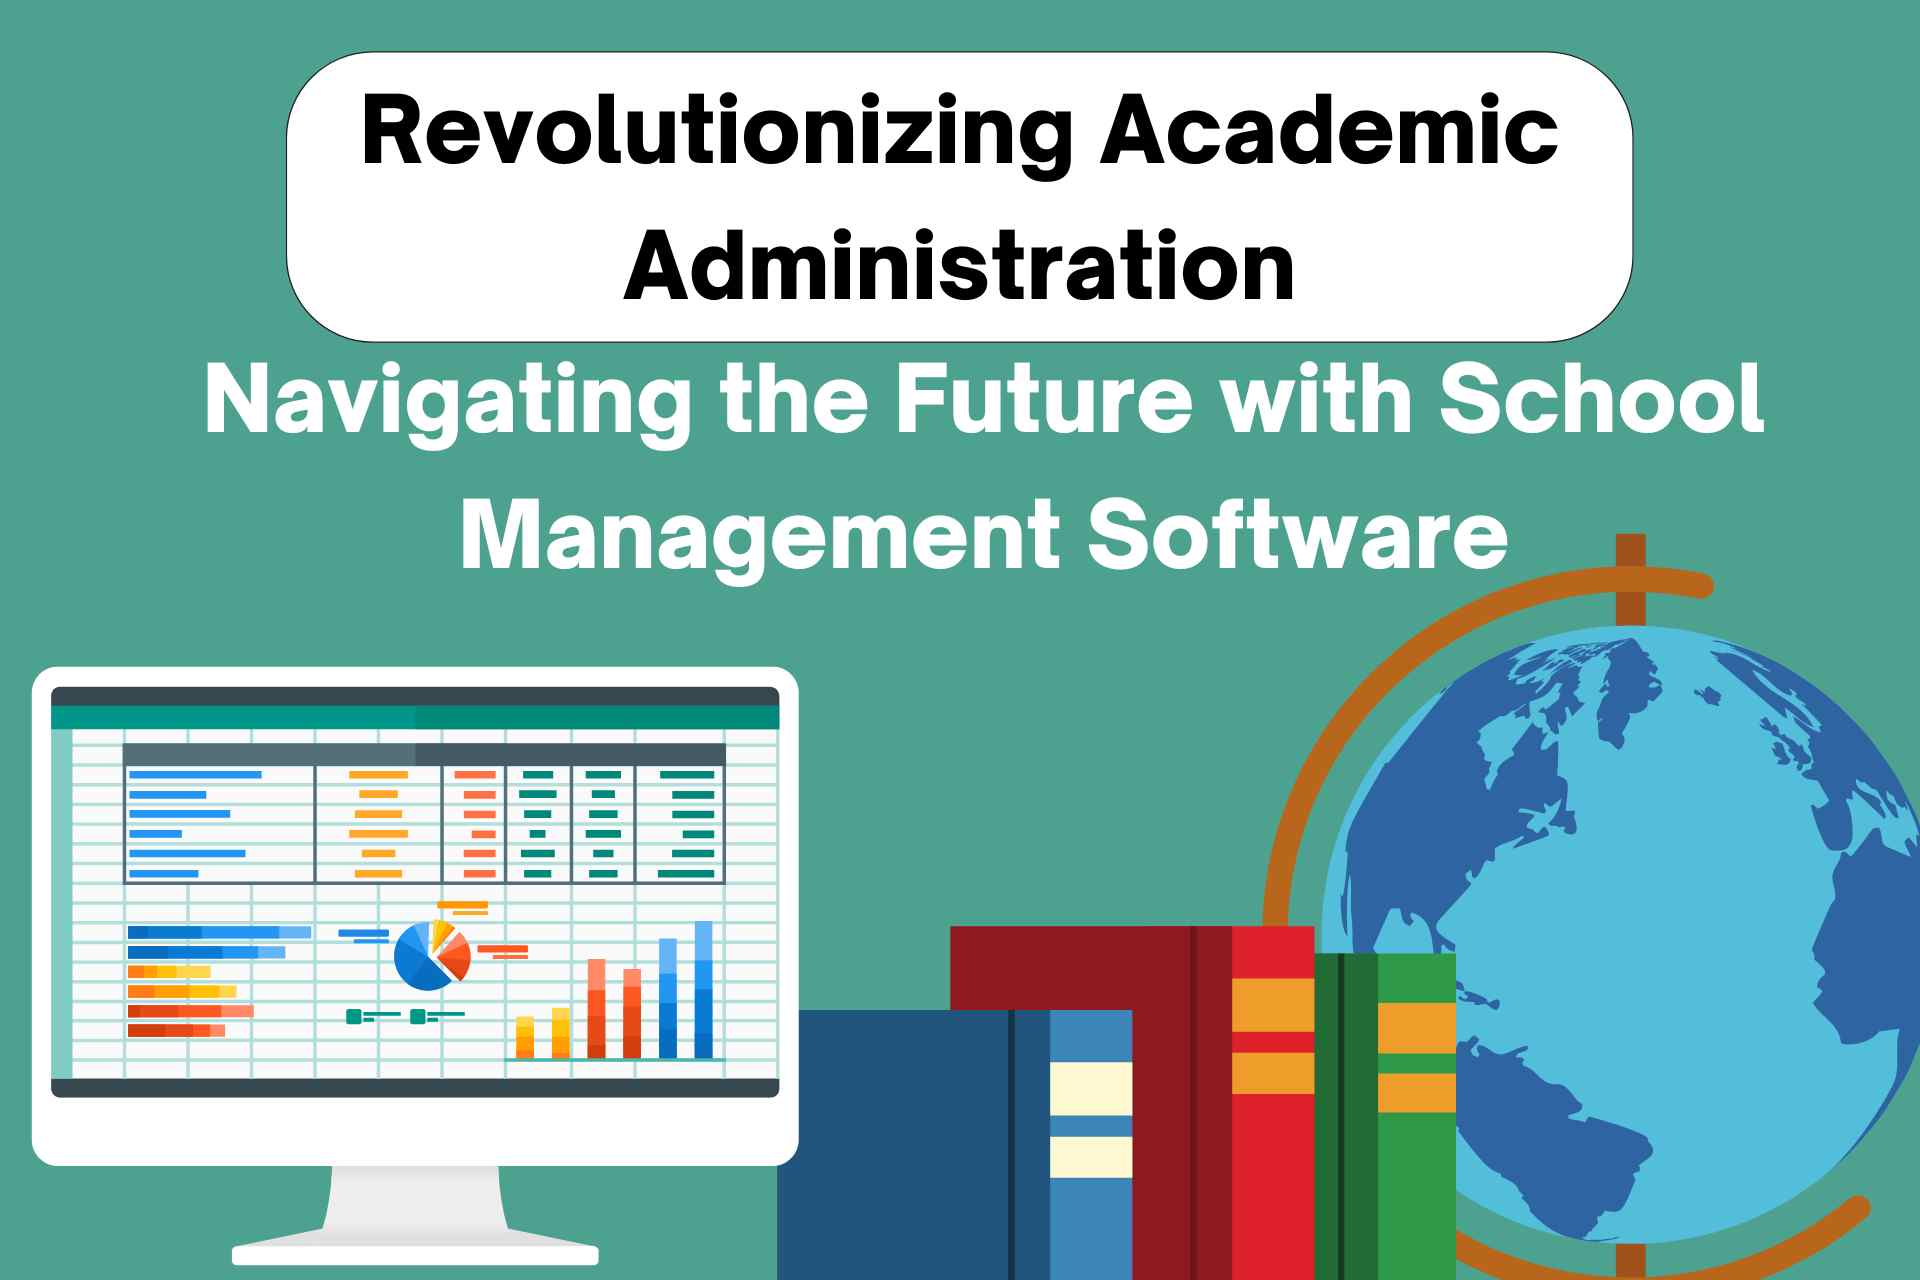 Navigating the Future with School Management Software